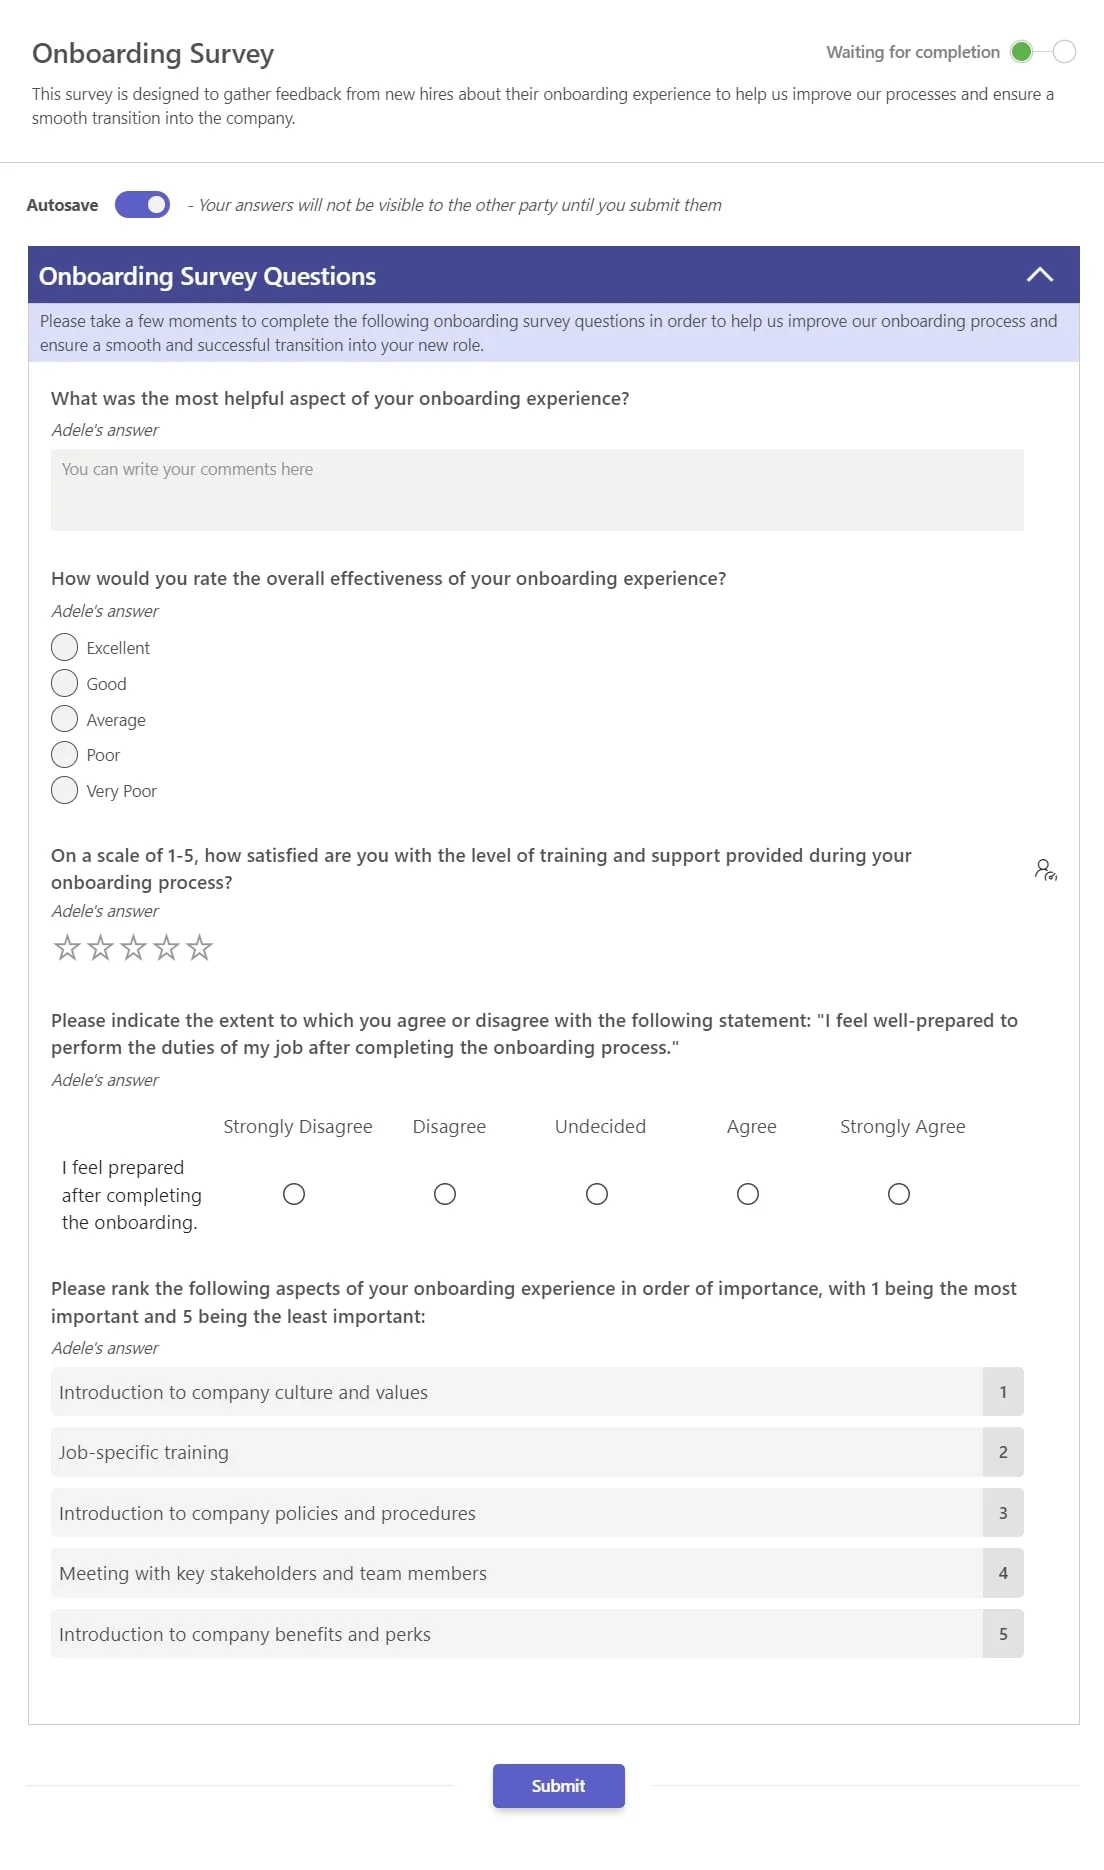 teamflect employee onboarding survey template with questions